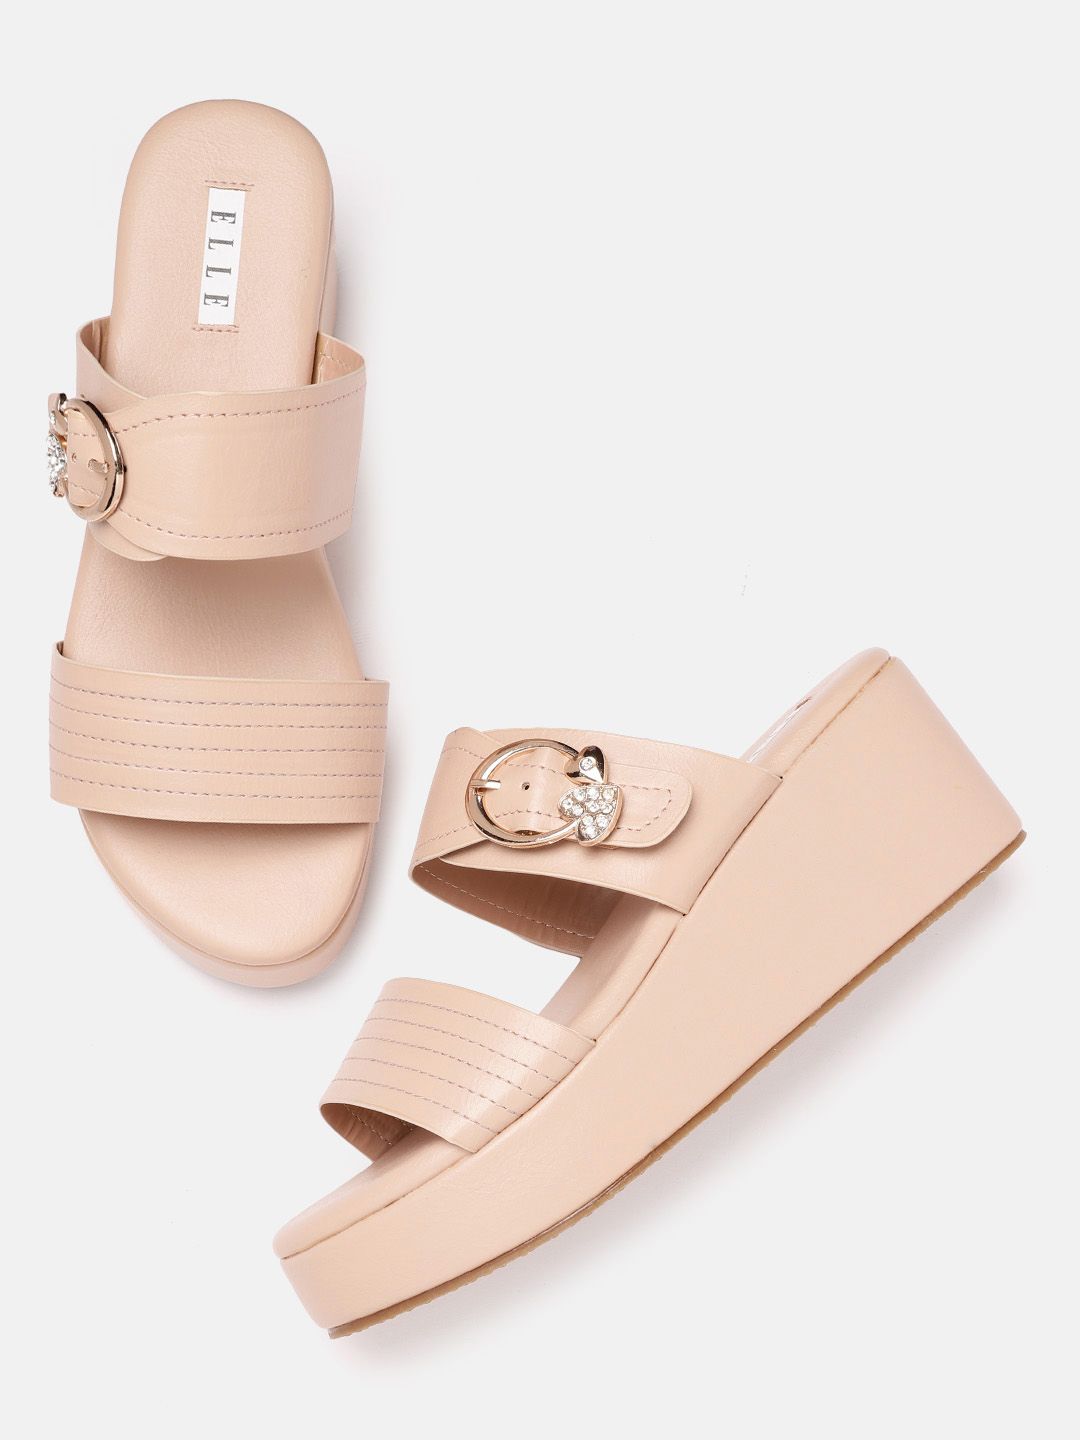 ELLE Peach-Coloured Thread Work Wedges with Buckles Price in India